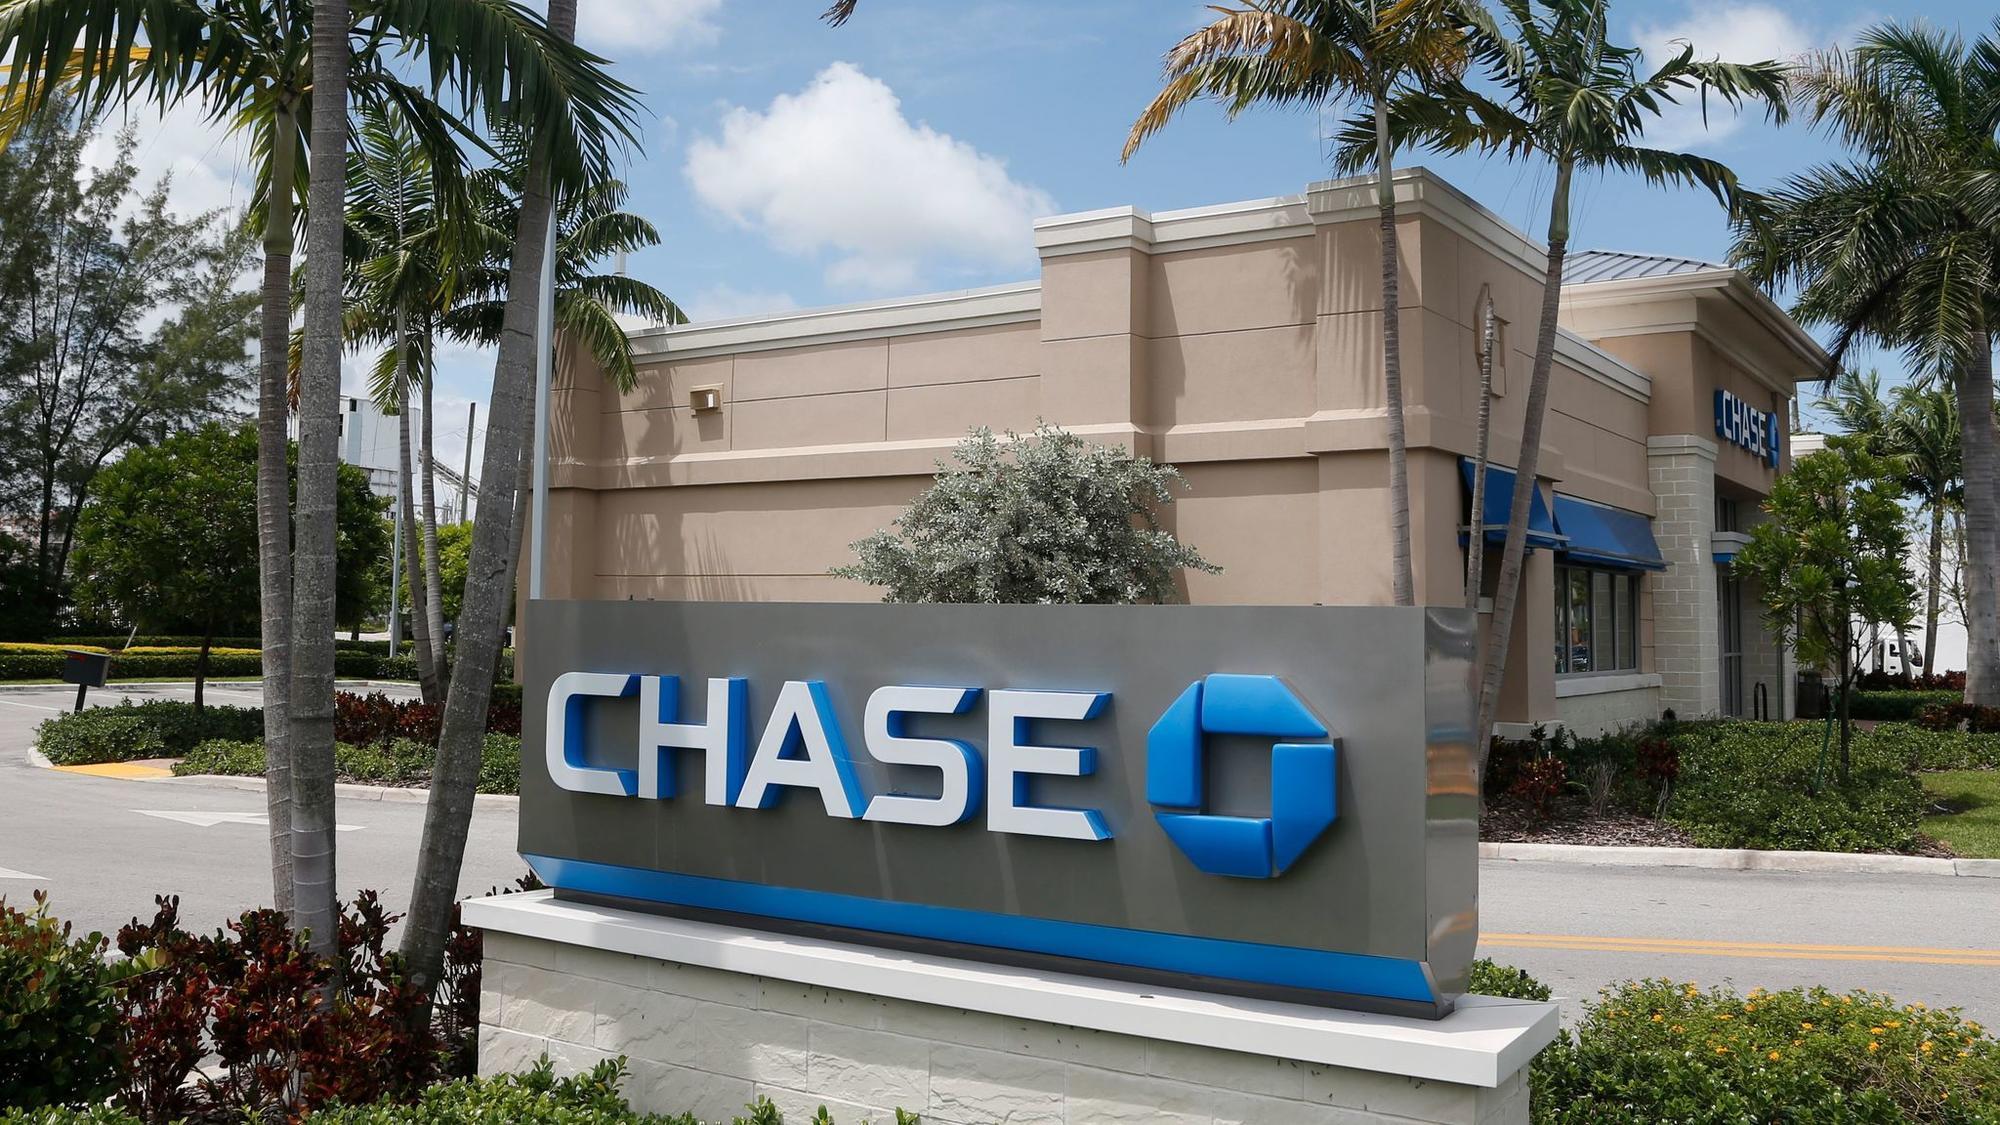 Chase glitch allowed customers to see others' bank accounts Chicago